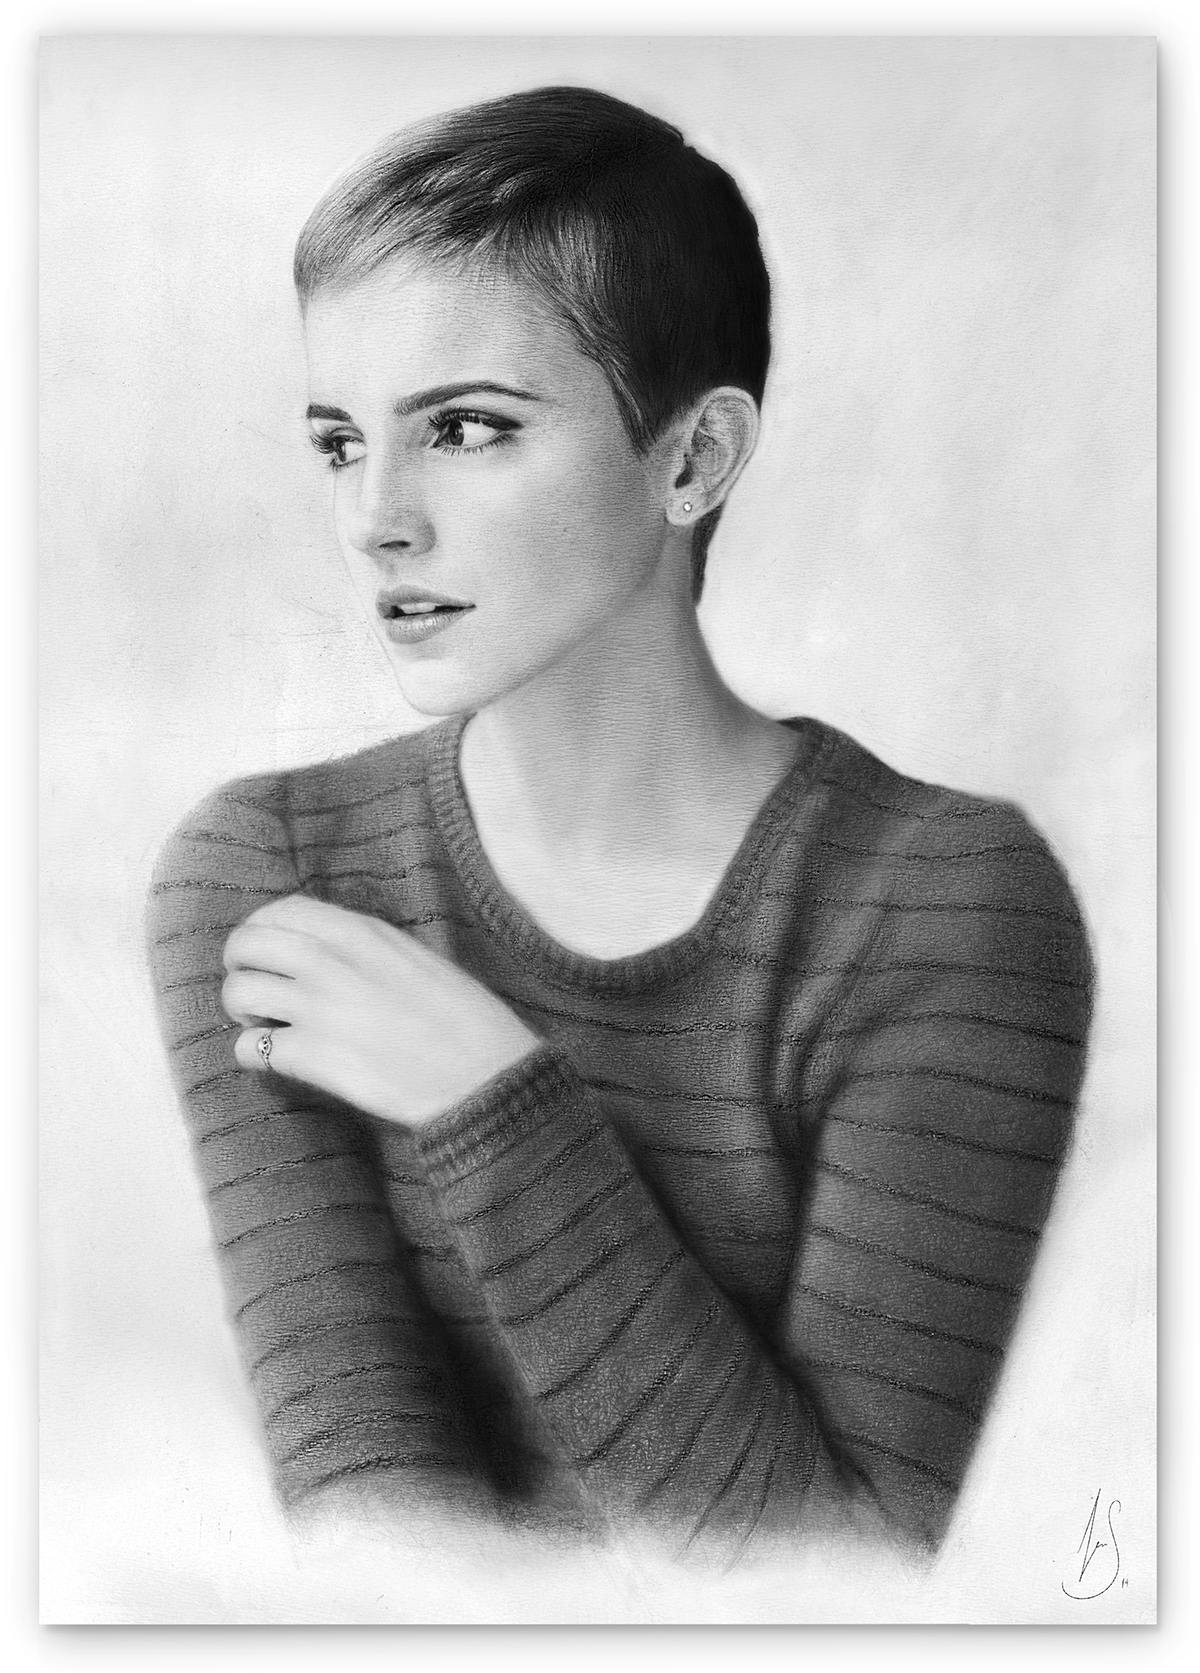 lights and shadows hyperrealism draw black White pencil light shadow portrait black and white